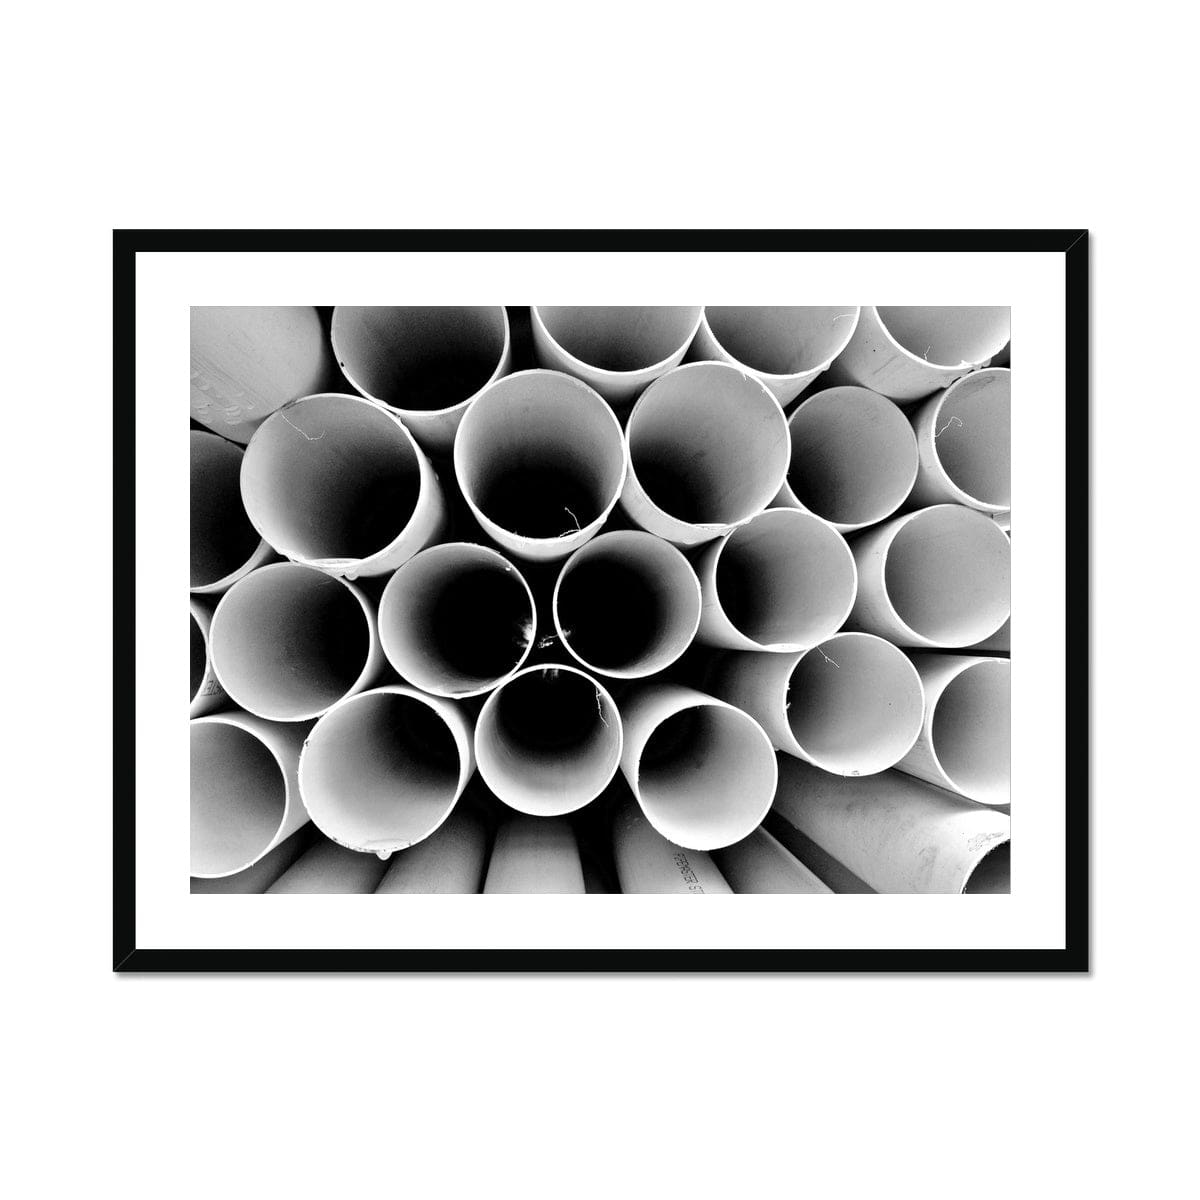 Seek & Ramble Framed A4 Landscape (29x21cm) / Black Frame Monochrome Round Pipes Abstract Framed & Mounted Print